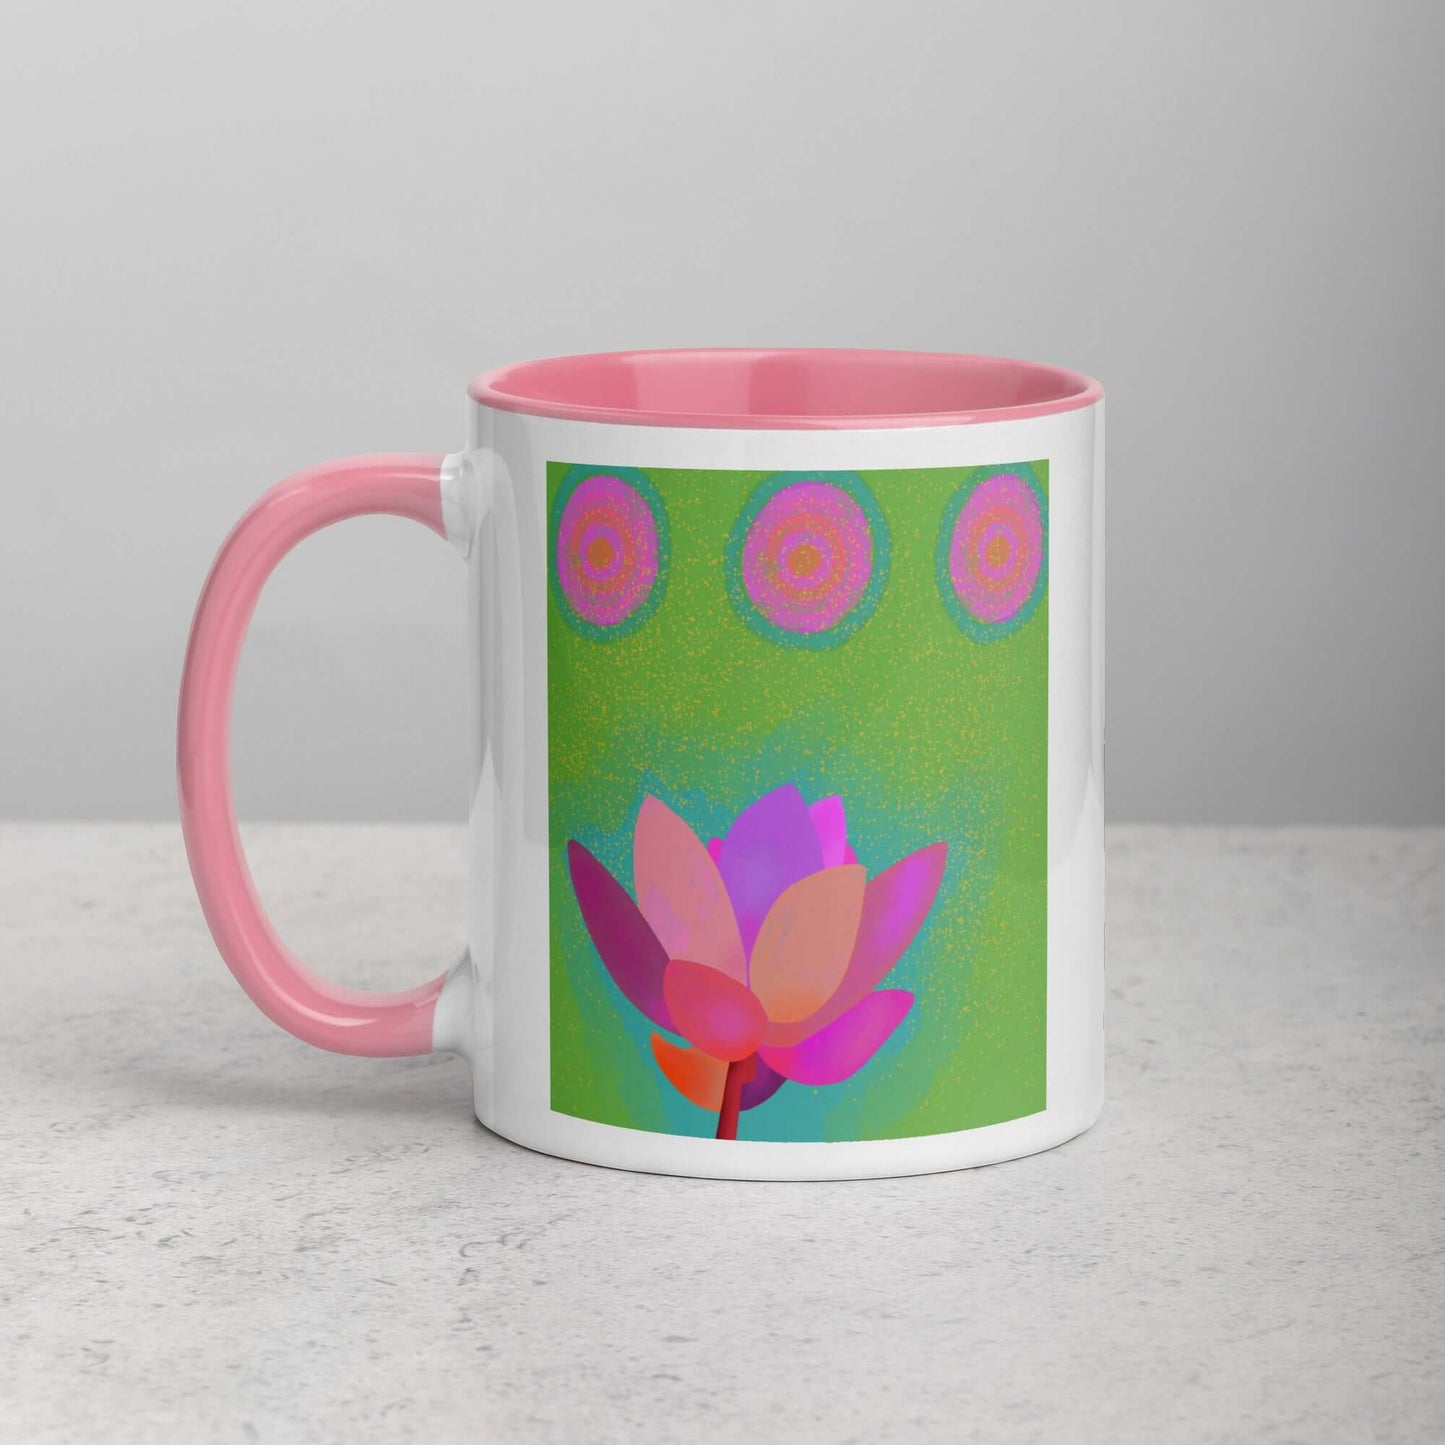 Pink Lotus Flower on Green Background “Lotus Dots” Mug with Light Pink Color Inside Left Handed Front View